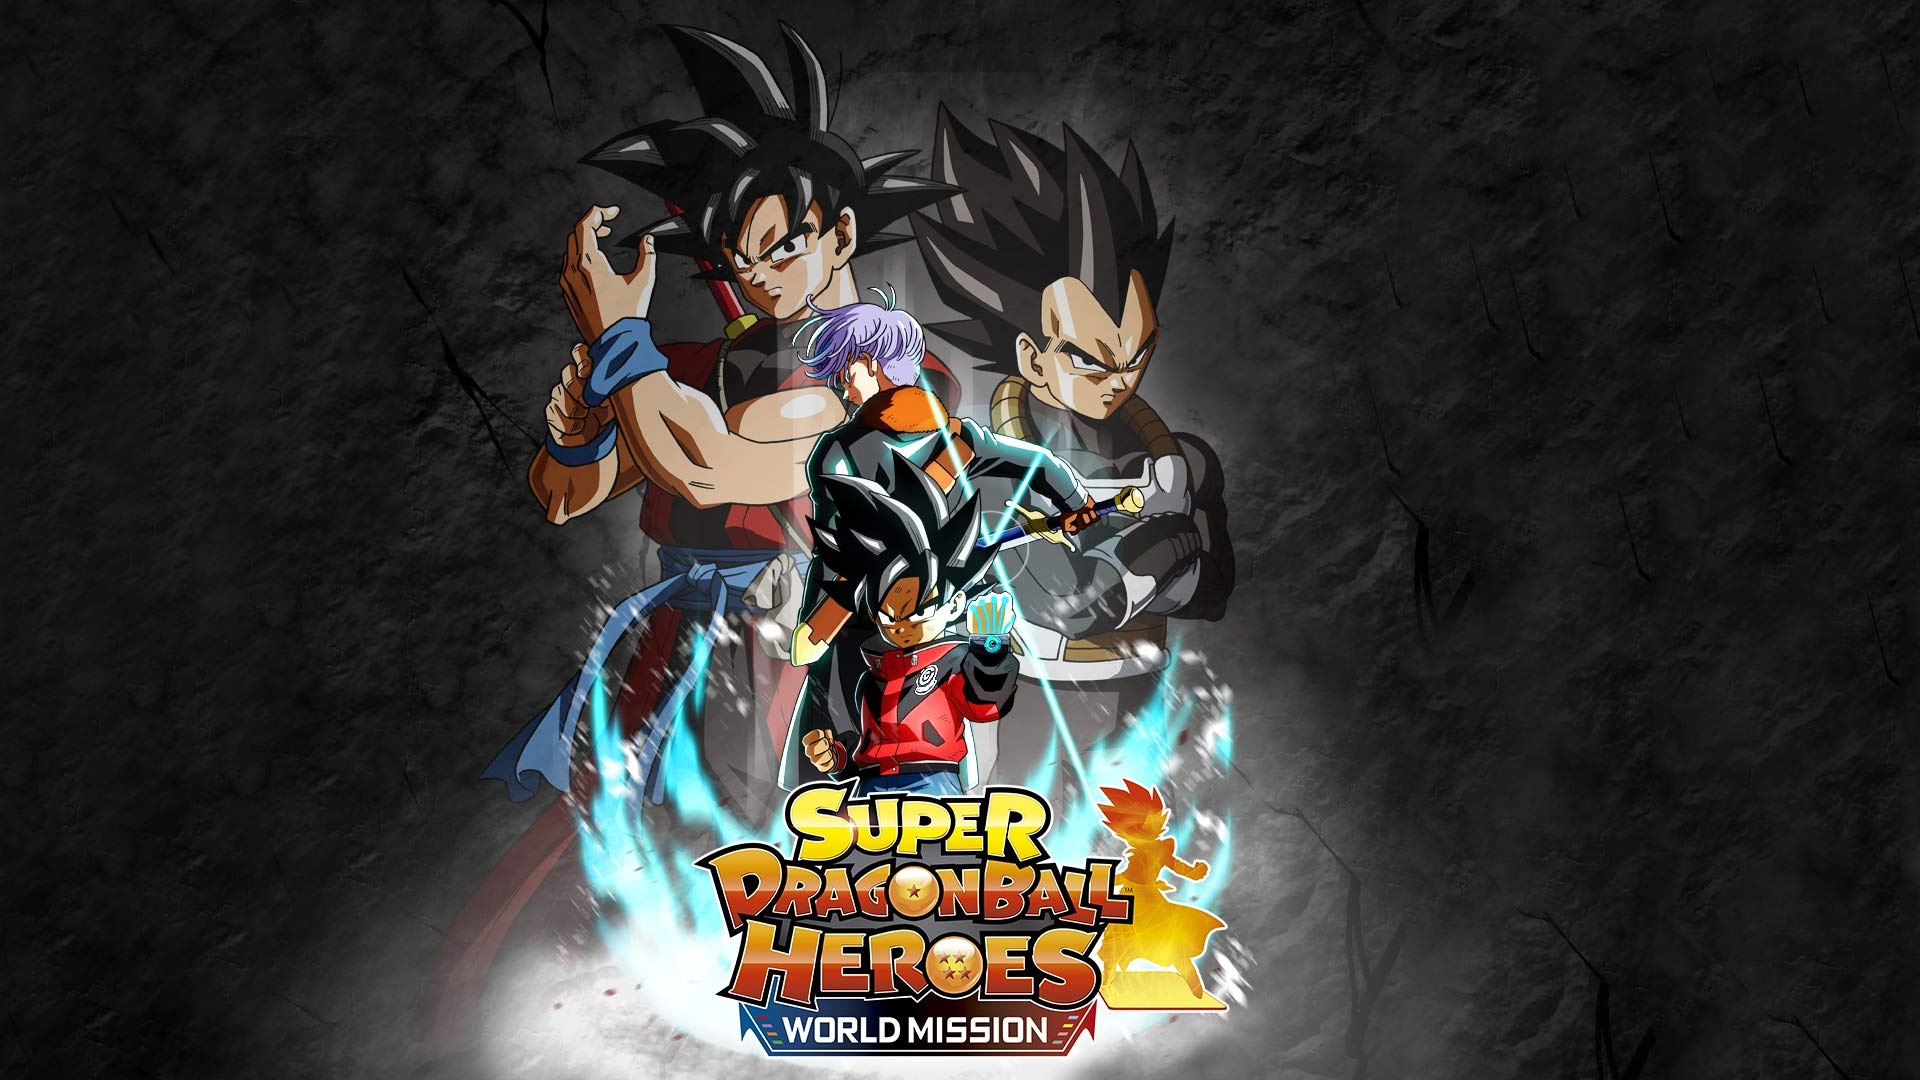 Super Dragon Ball Heroes Wallpapers - Top Free Super Dragon Ball Heroes Backgrounds 1920x1080